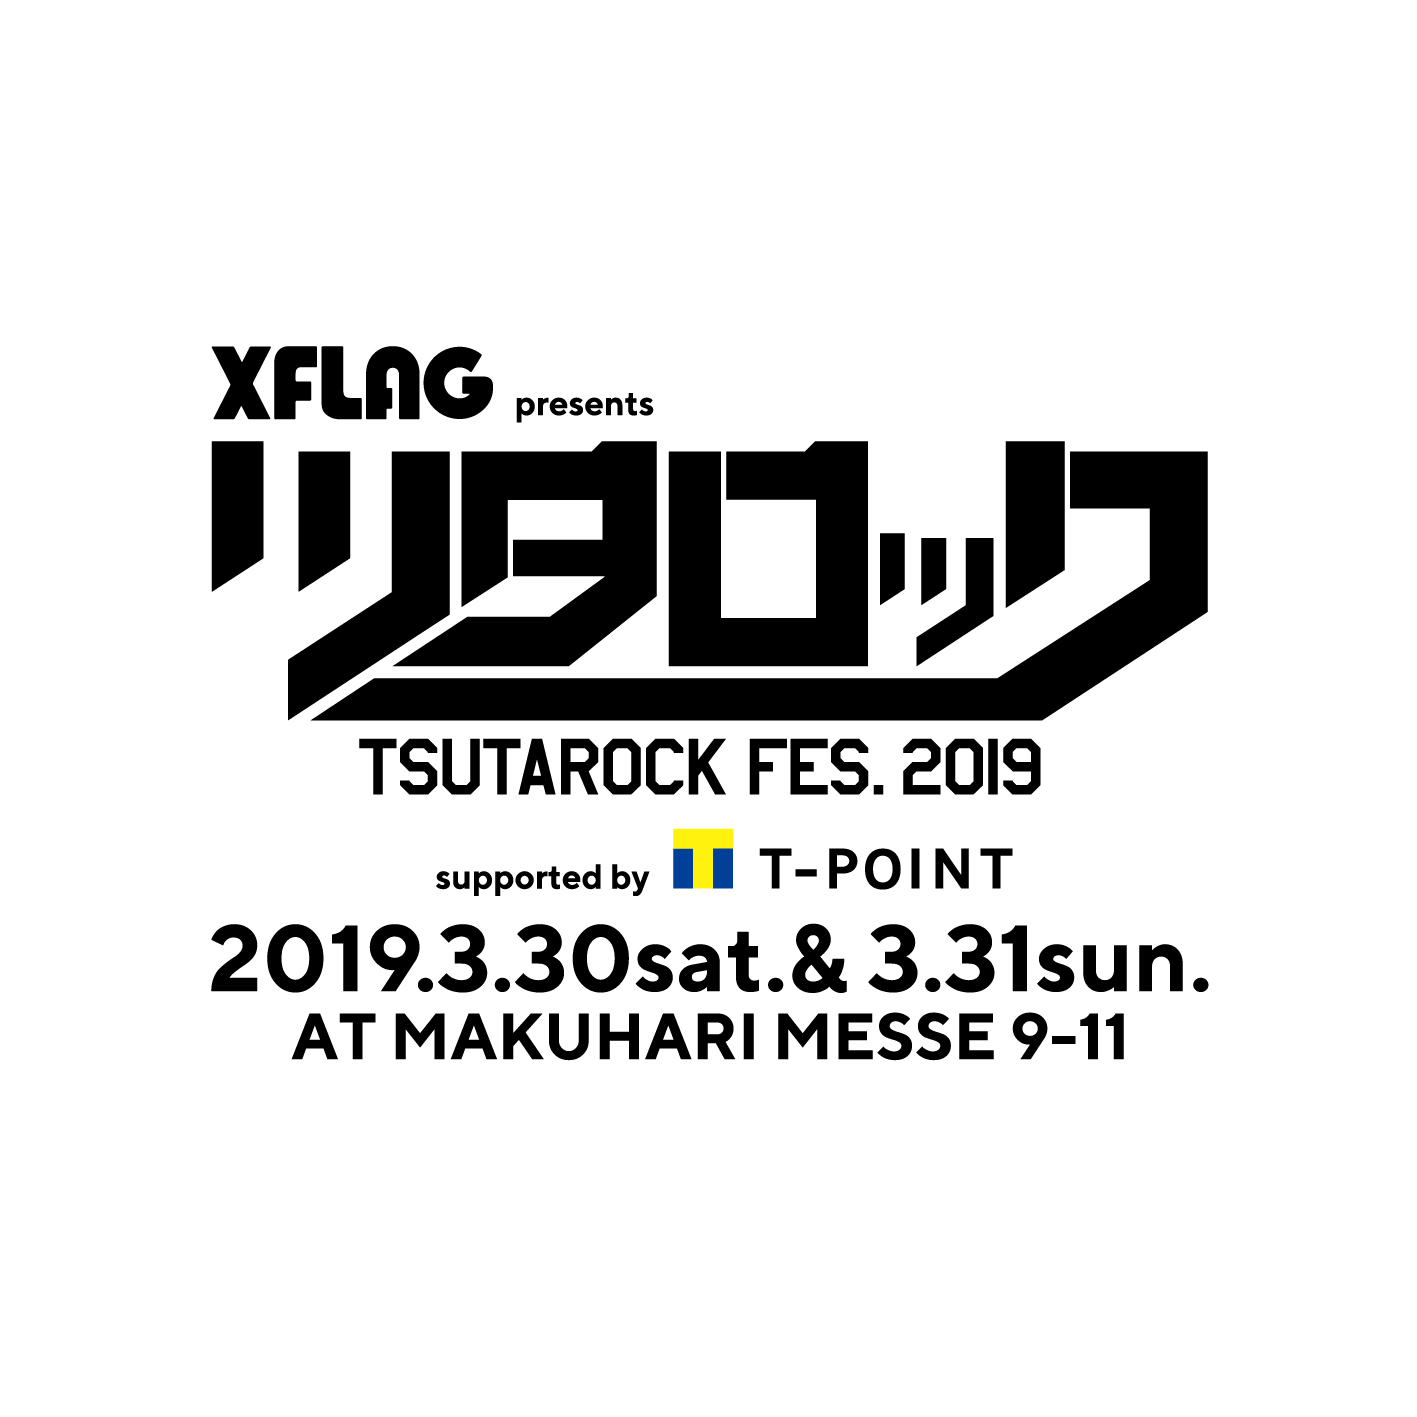 XFLAG presents ツタロックフェス2019 supported by Tポイント